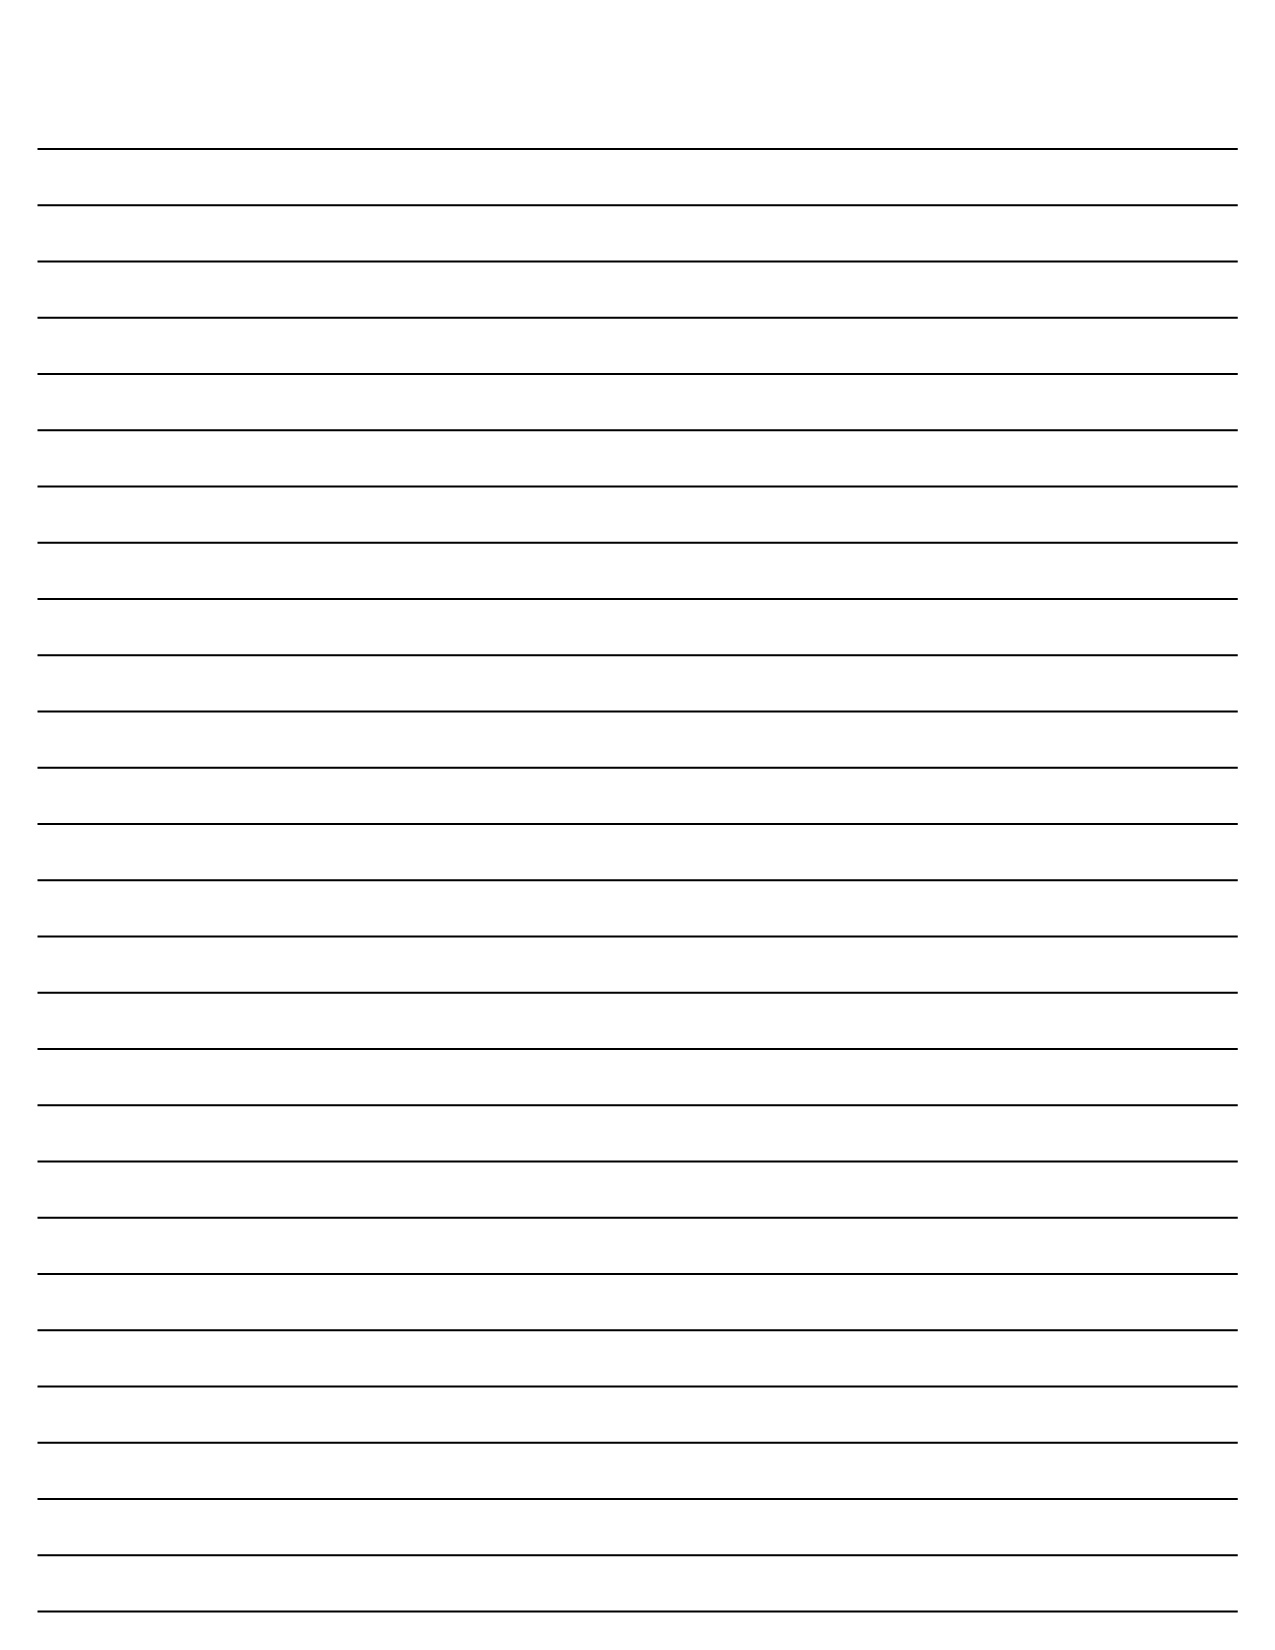 Lined Free Printable Paper